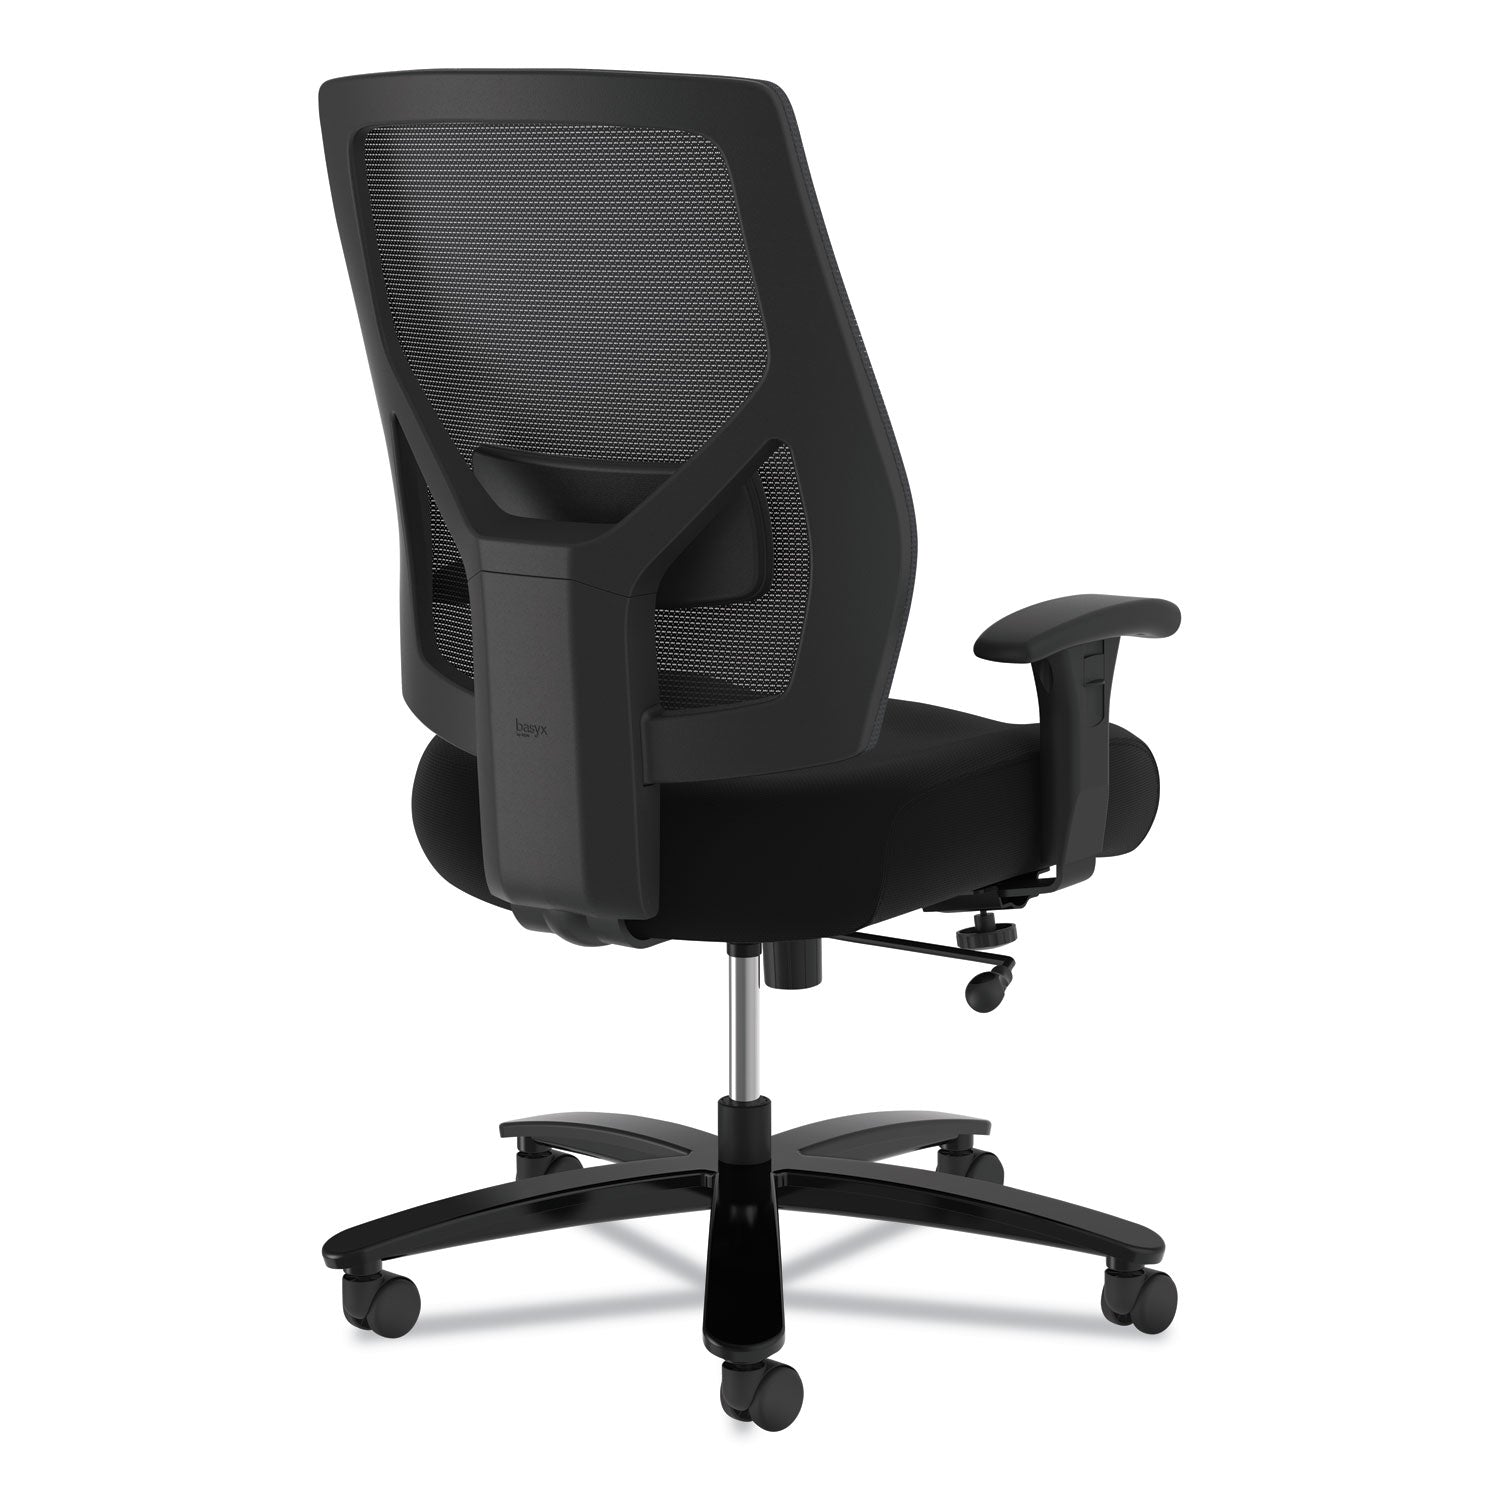 crio-big-and-tall-mid-back-task-chair-supports-up-to-450-lb-18-to-22-seat-height-black_bsxvl585es10t - 5